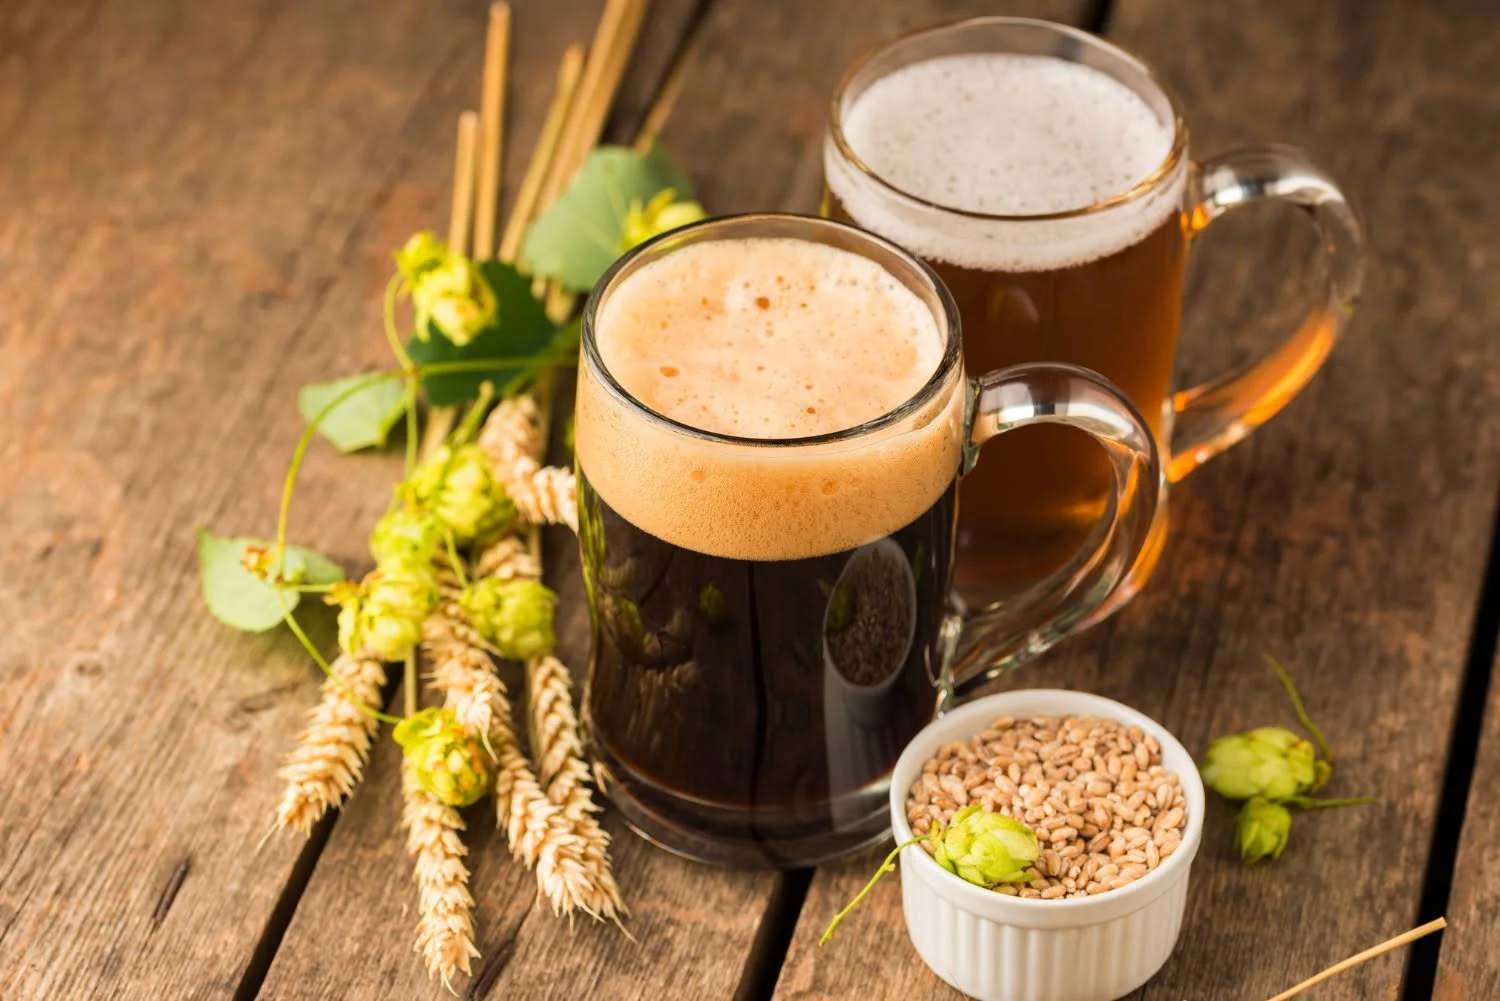 Examining the Impact of Malt Beverages on Health: A Balanced View